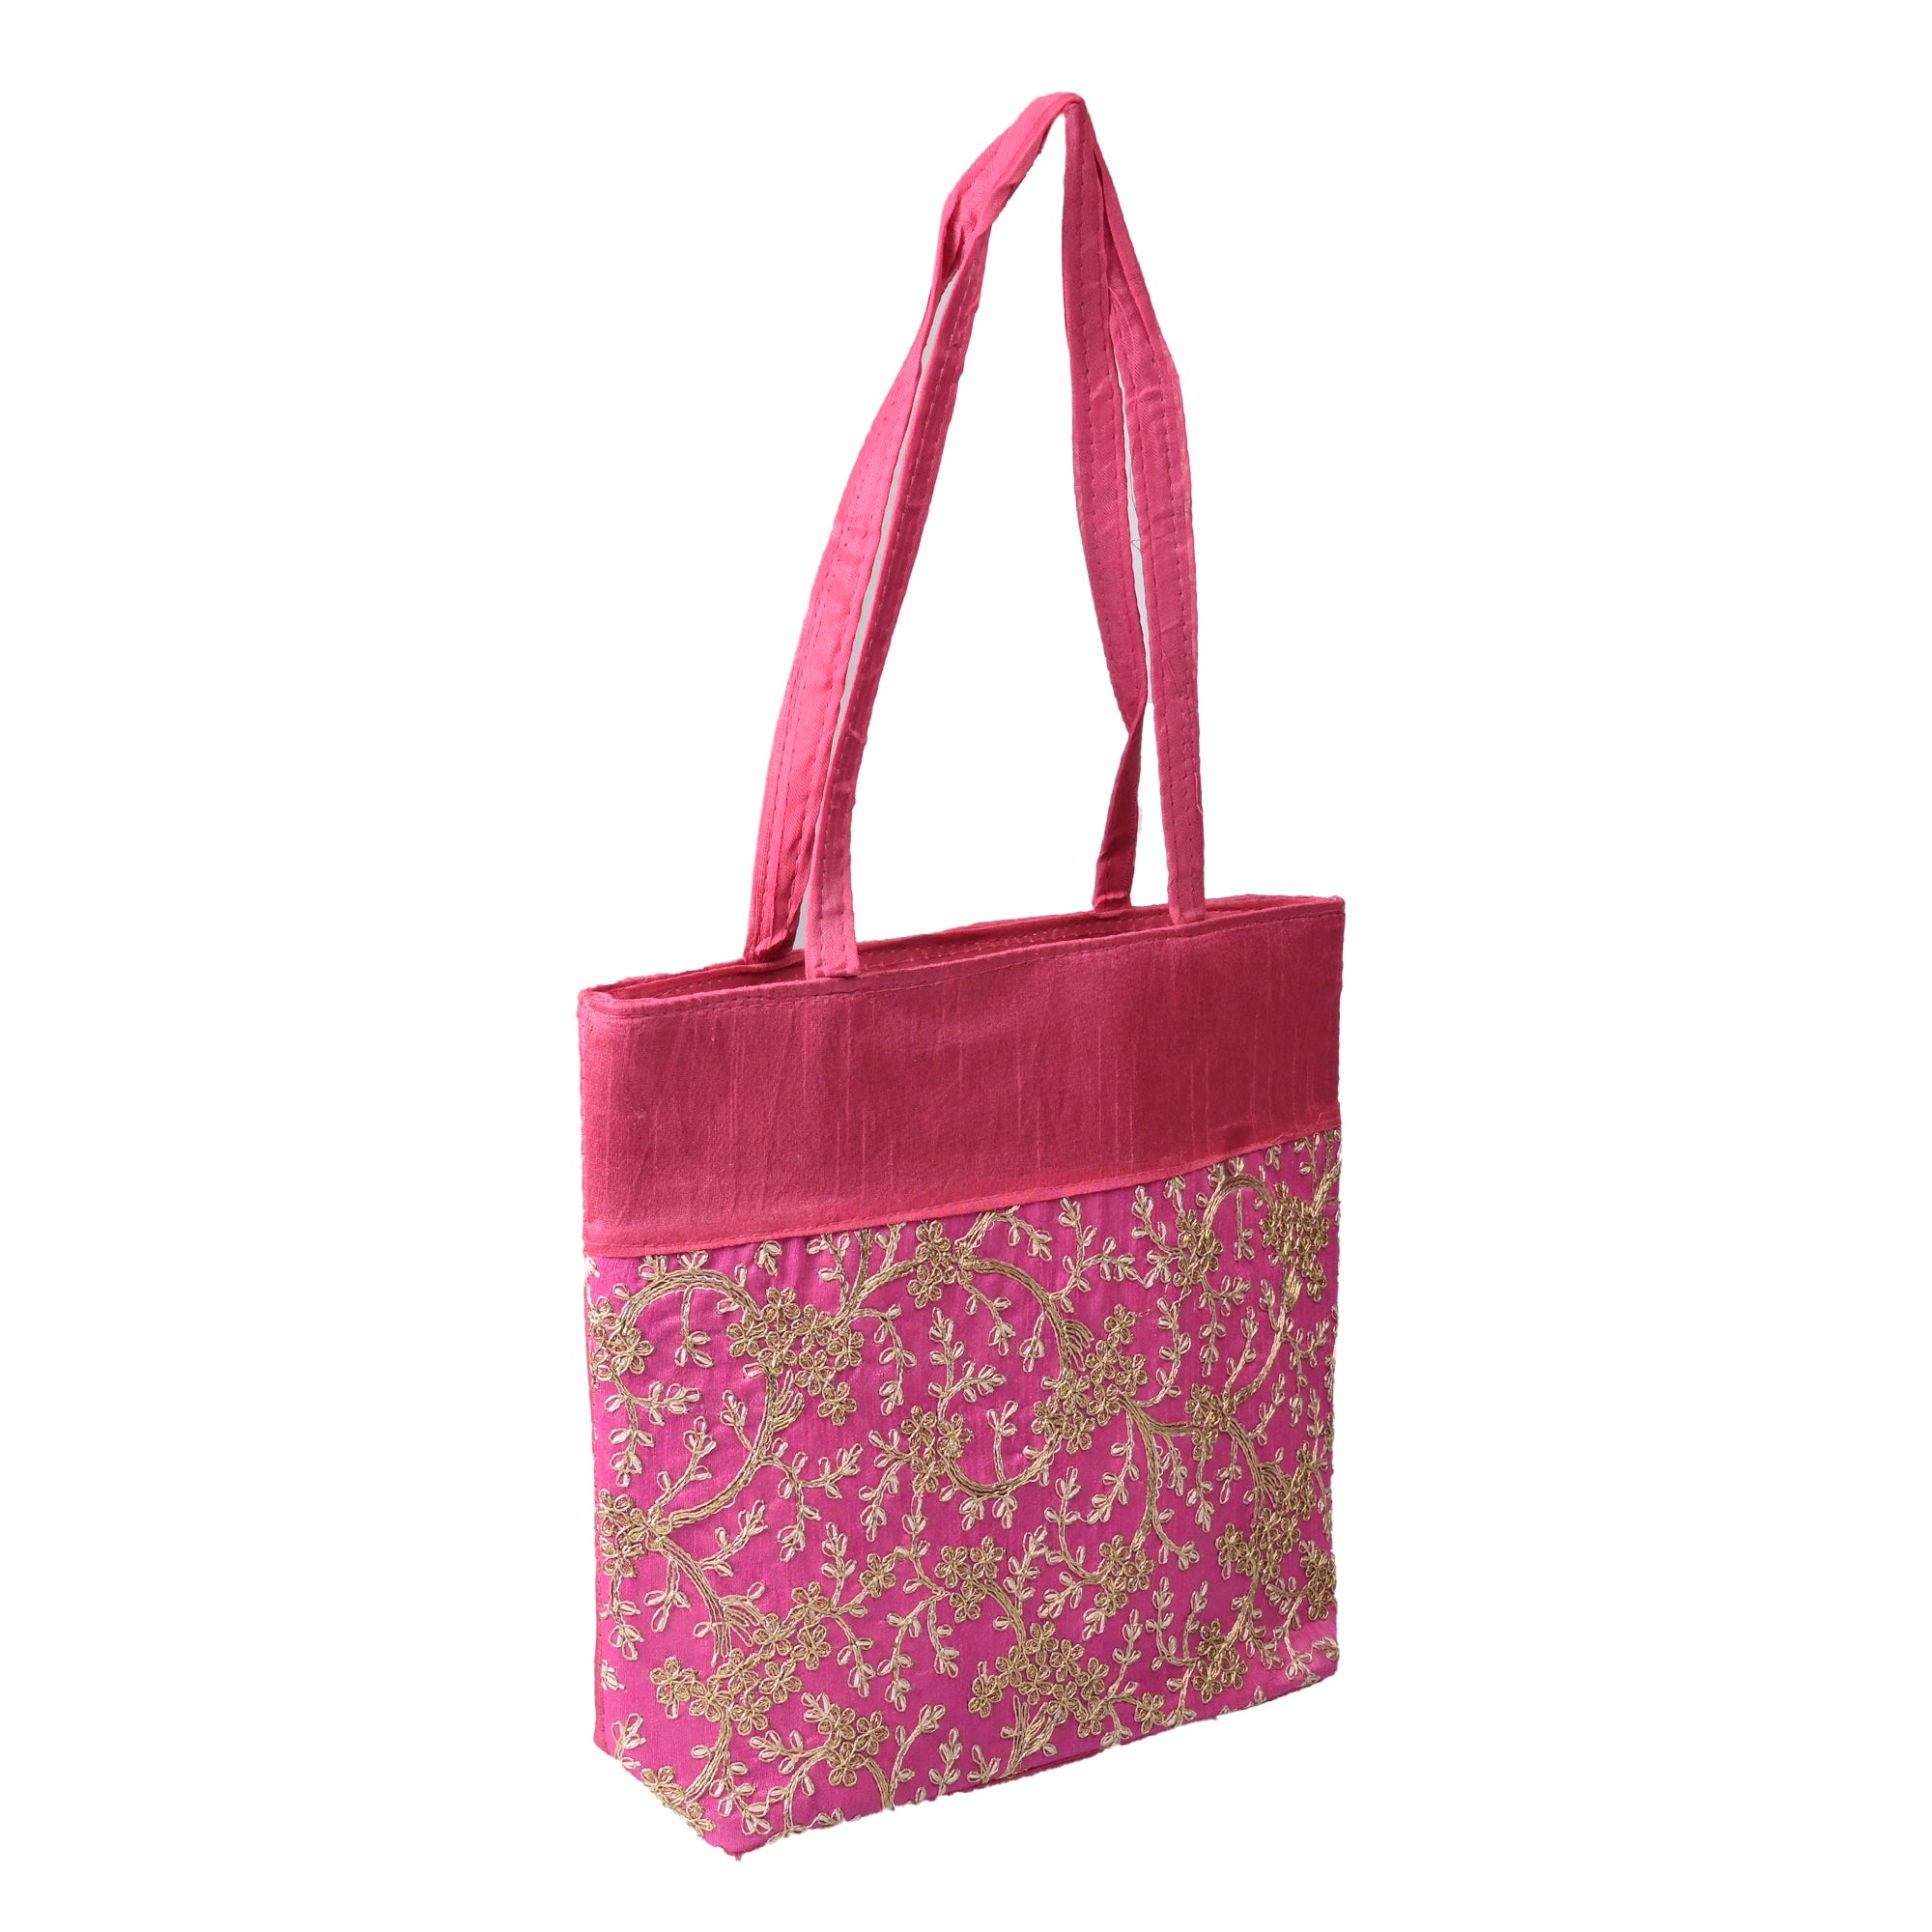 Women’s Handmade Embroidery Cotton Tote Bag